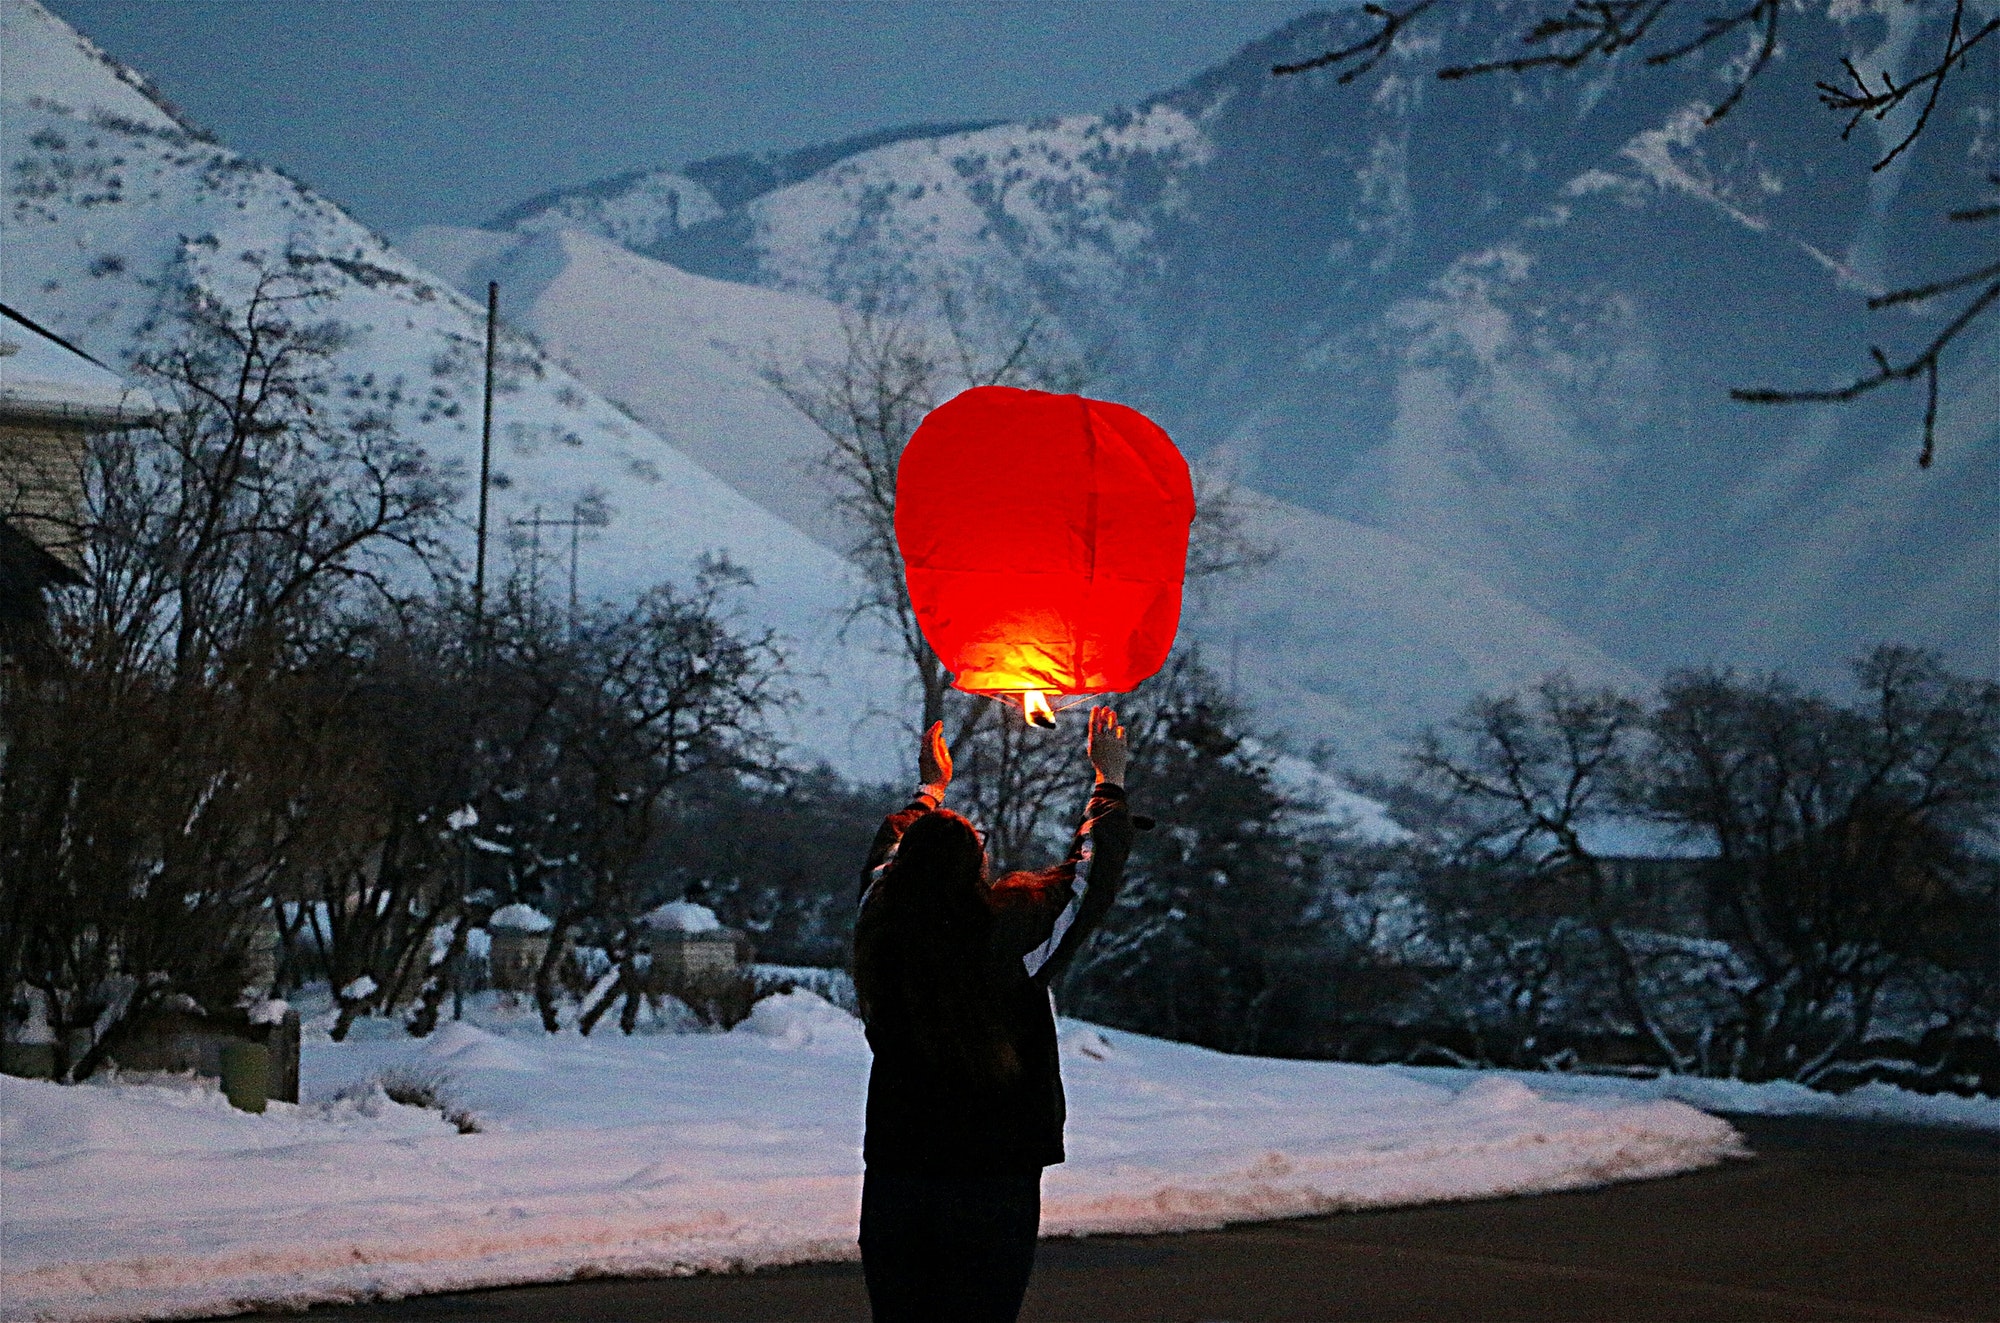 Woman from behind preparing to release a red lantern skyward in celebration of Chinese New Year.